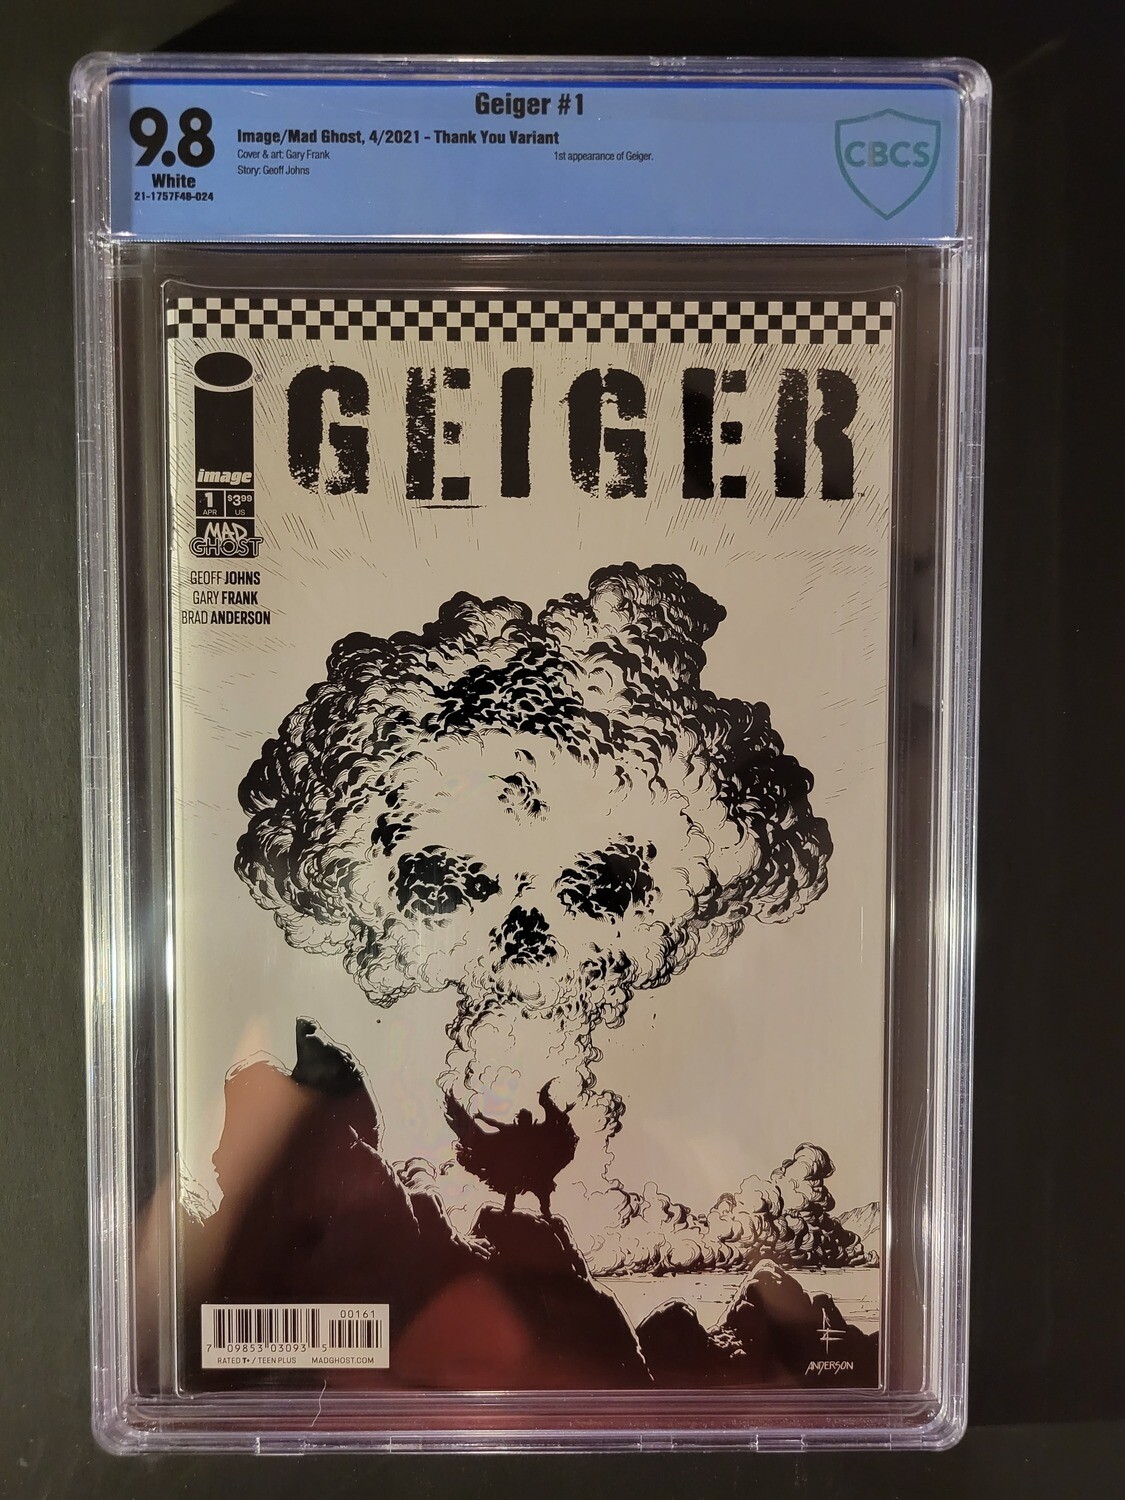 Geiger #1 (Thank You Variant) CBCS 9.8 1st appearance of Geiger